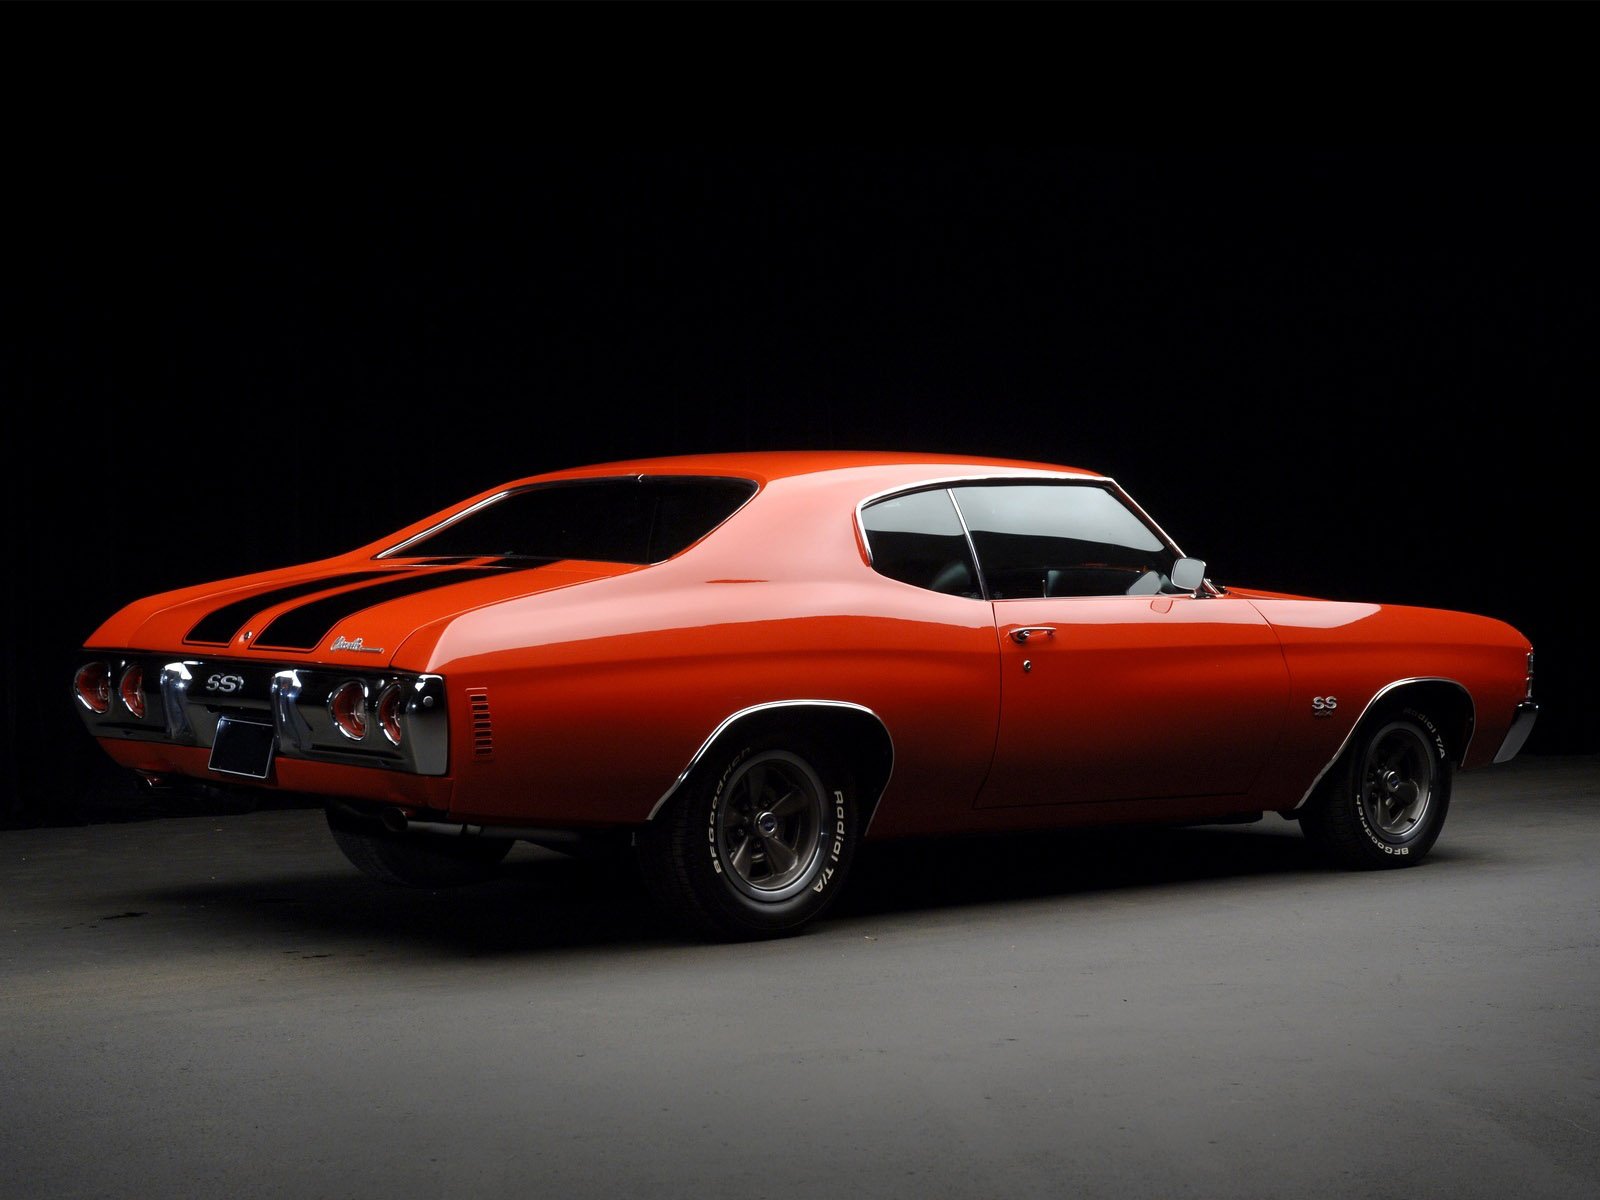 1971 Chevrolet Chevelle S S classic muscle f wallpaper background 1600x1200